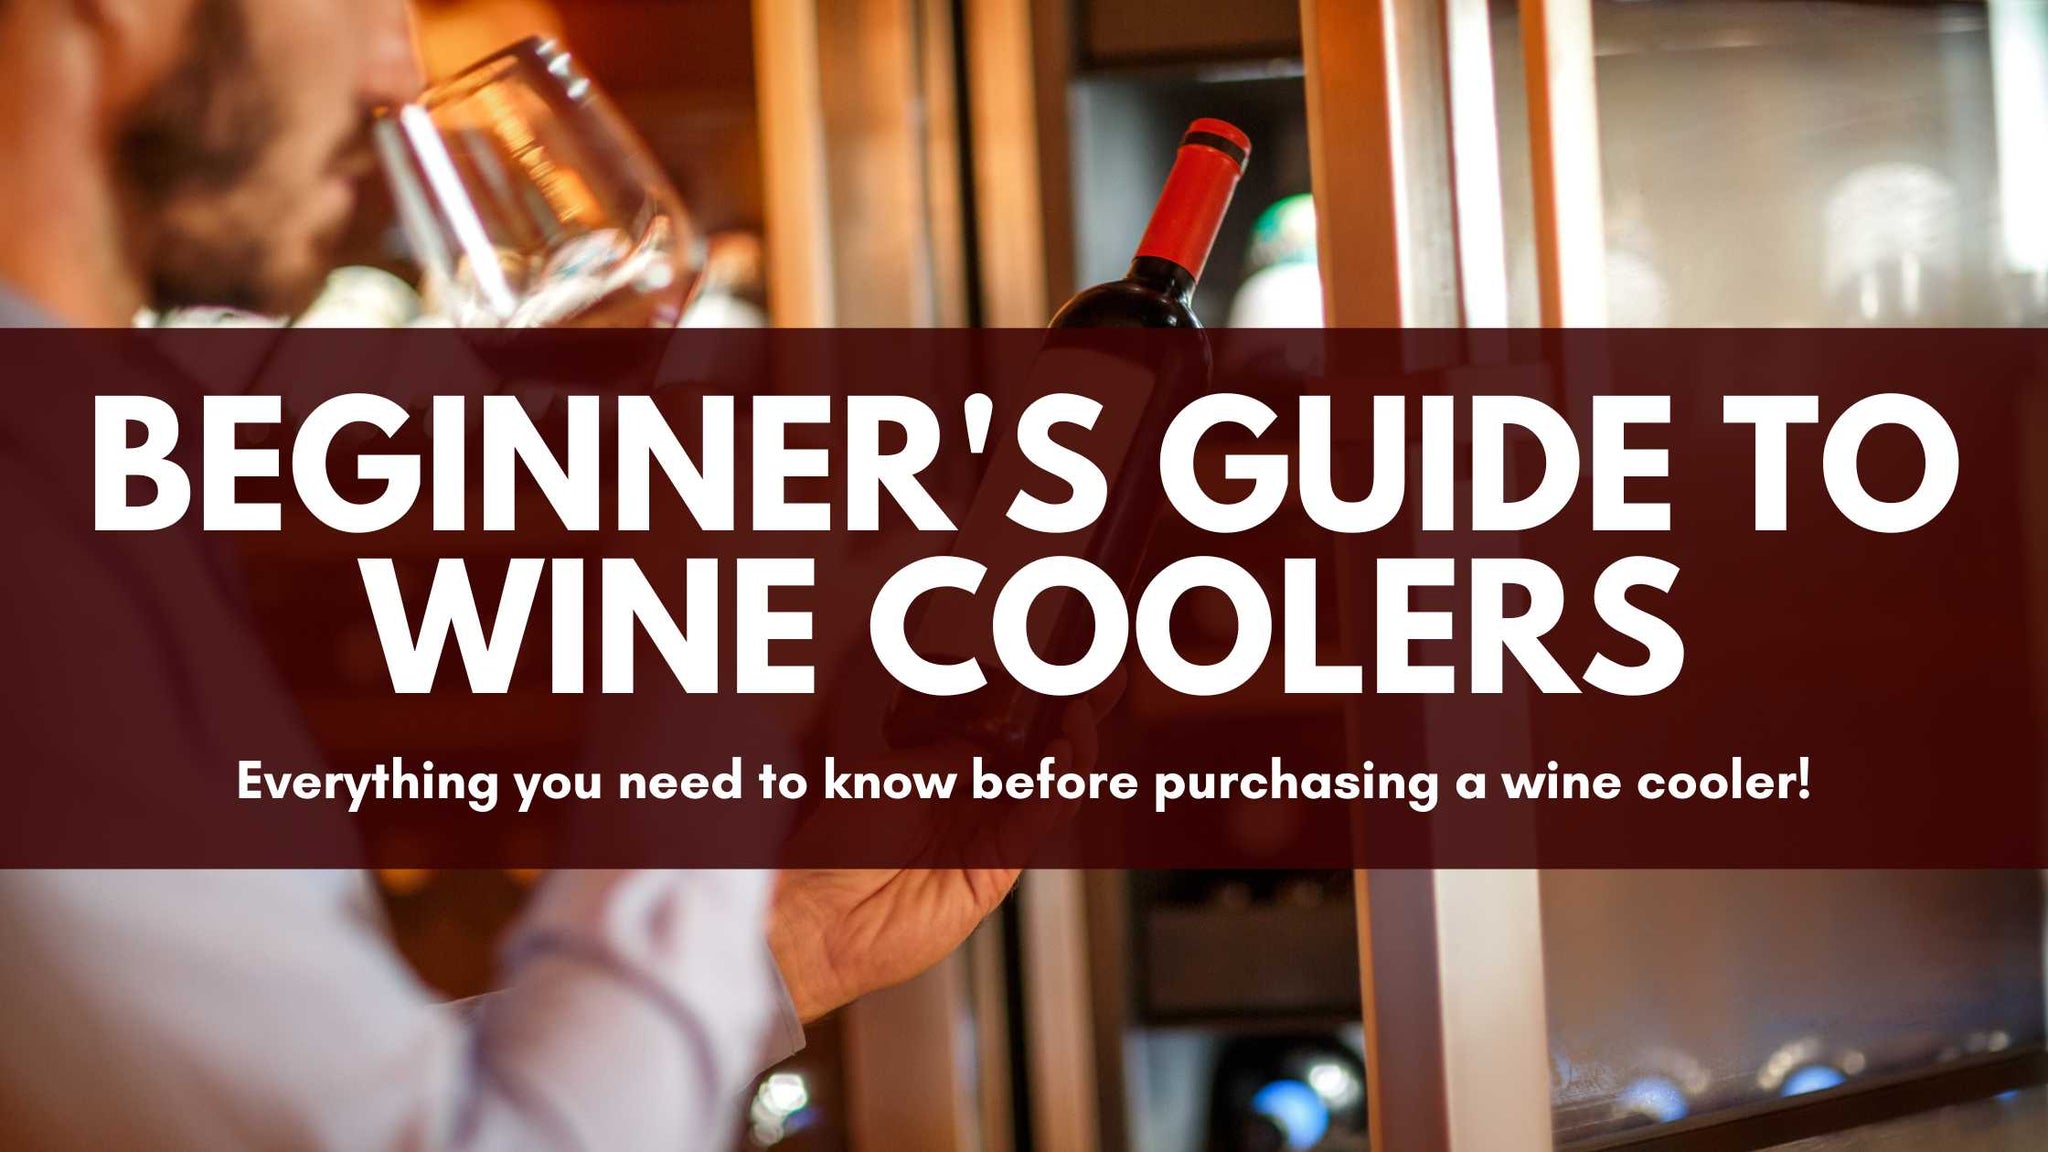 Beginner's Guide to Wine Coolers